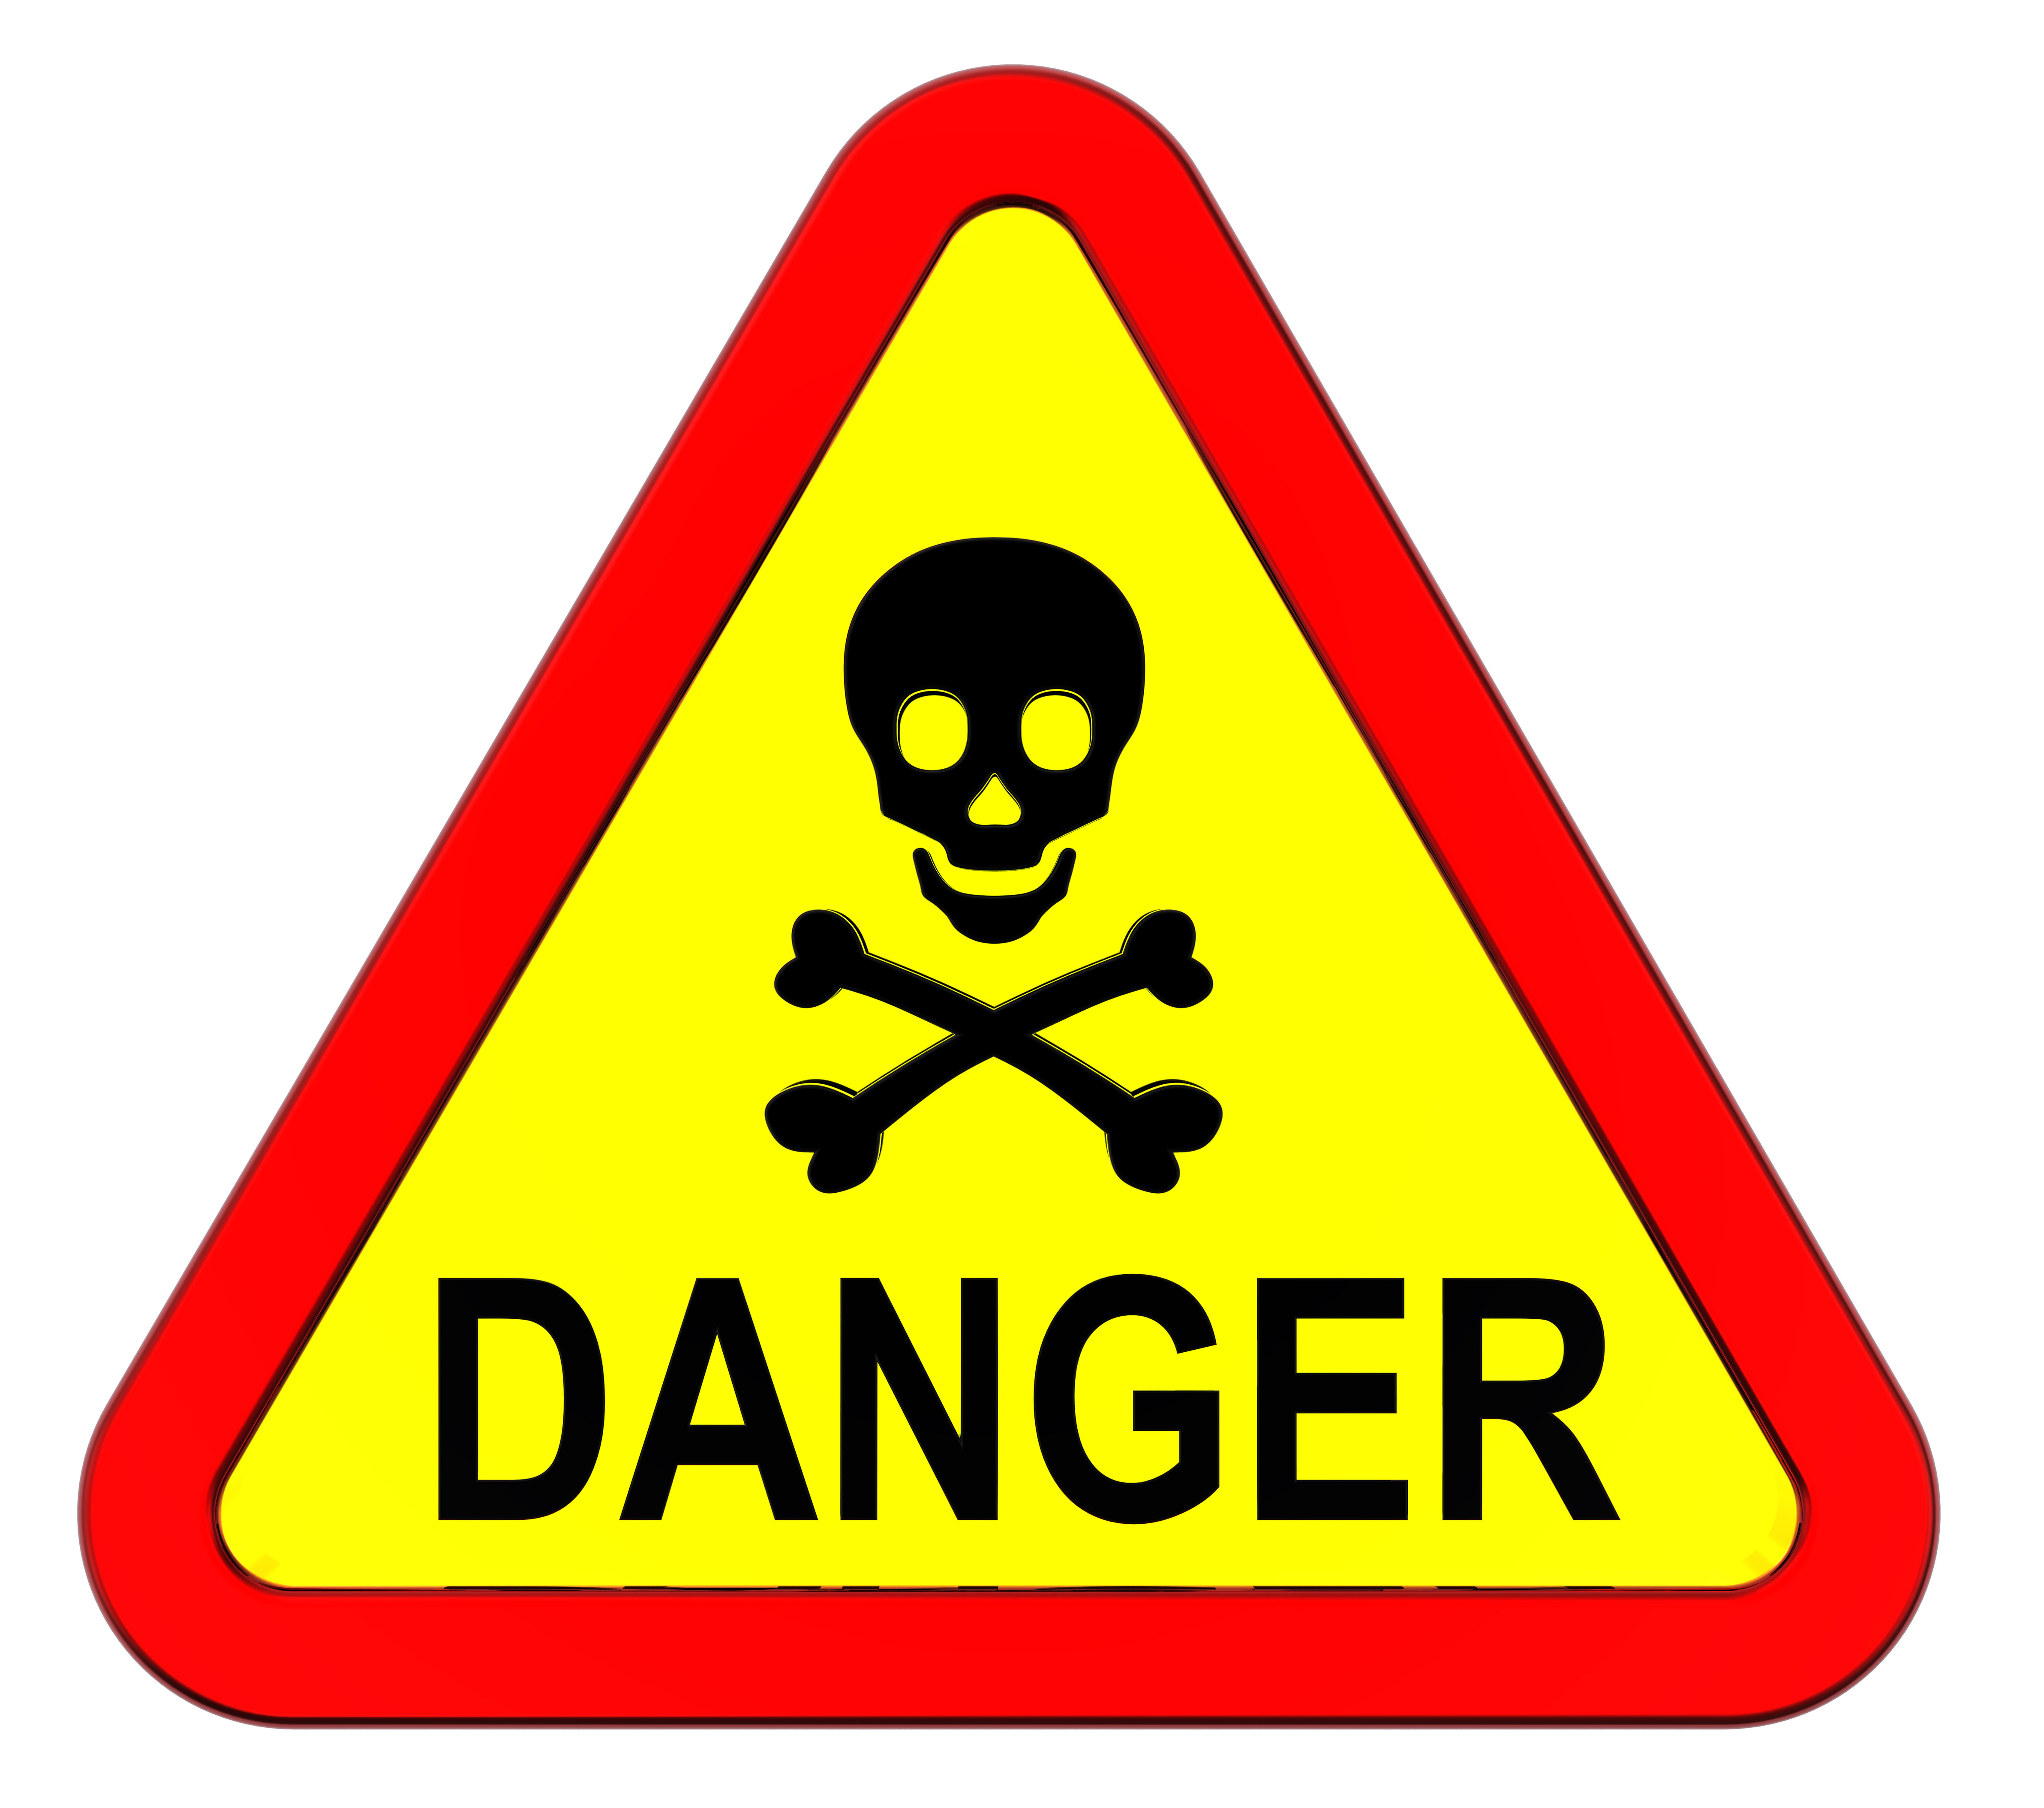 Signs Hazard Warning Clip Art At Clker Safety Signs In Laboratory | Hot ...